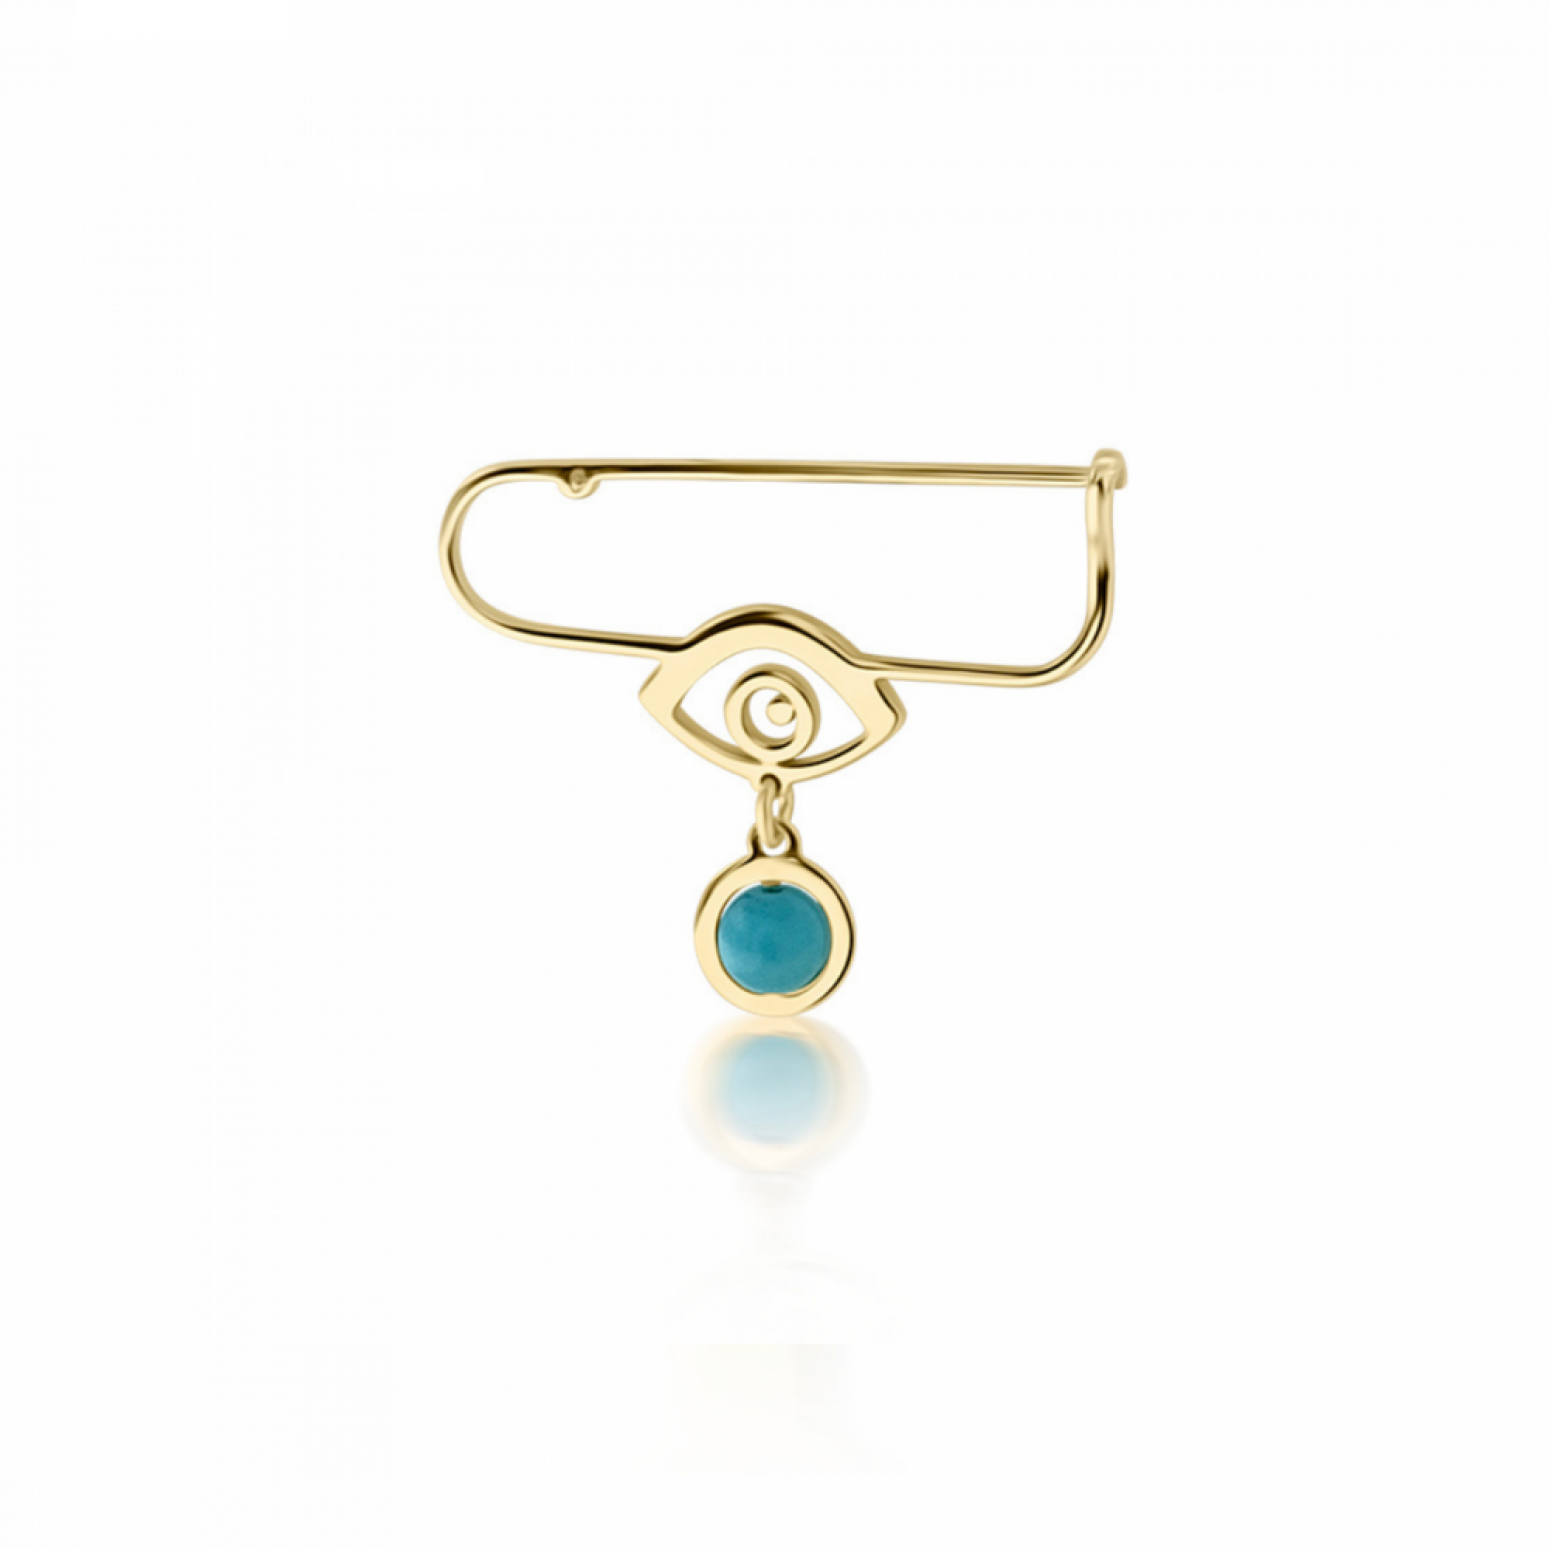 Babies pin K14 gold with eye and turquoise pf0125 BABIES Κοσμηματα - chrilia.gr